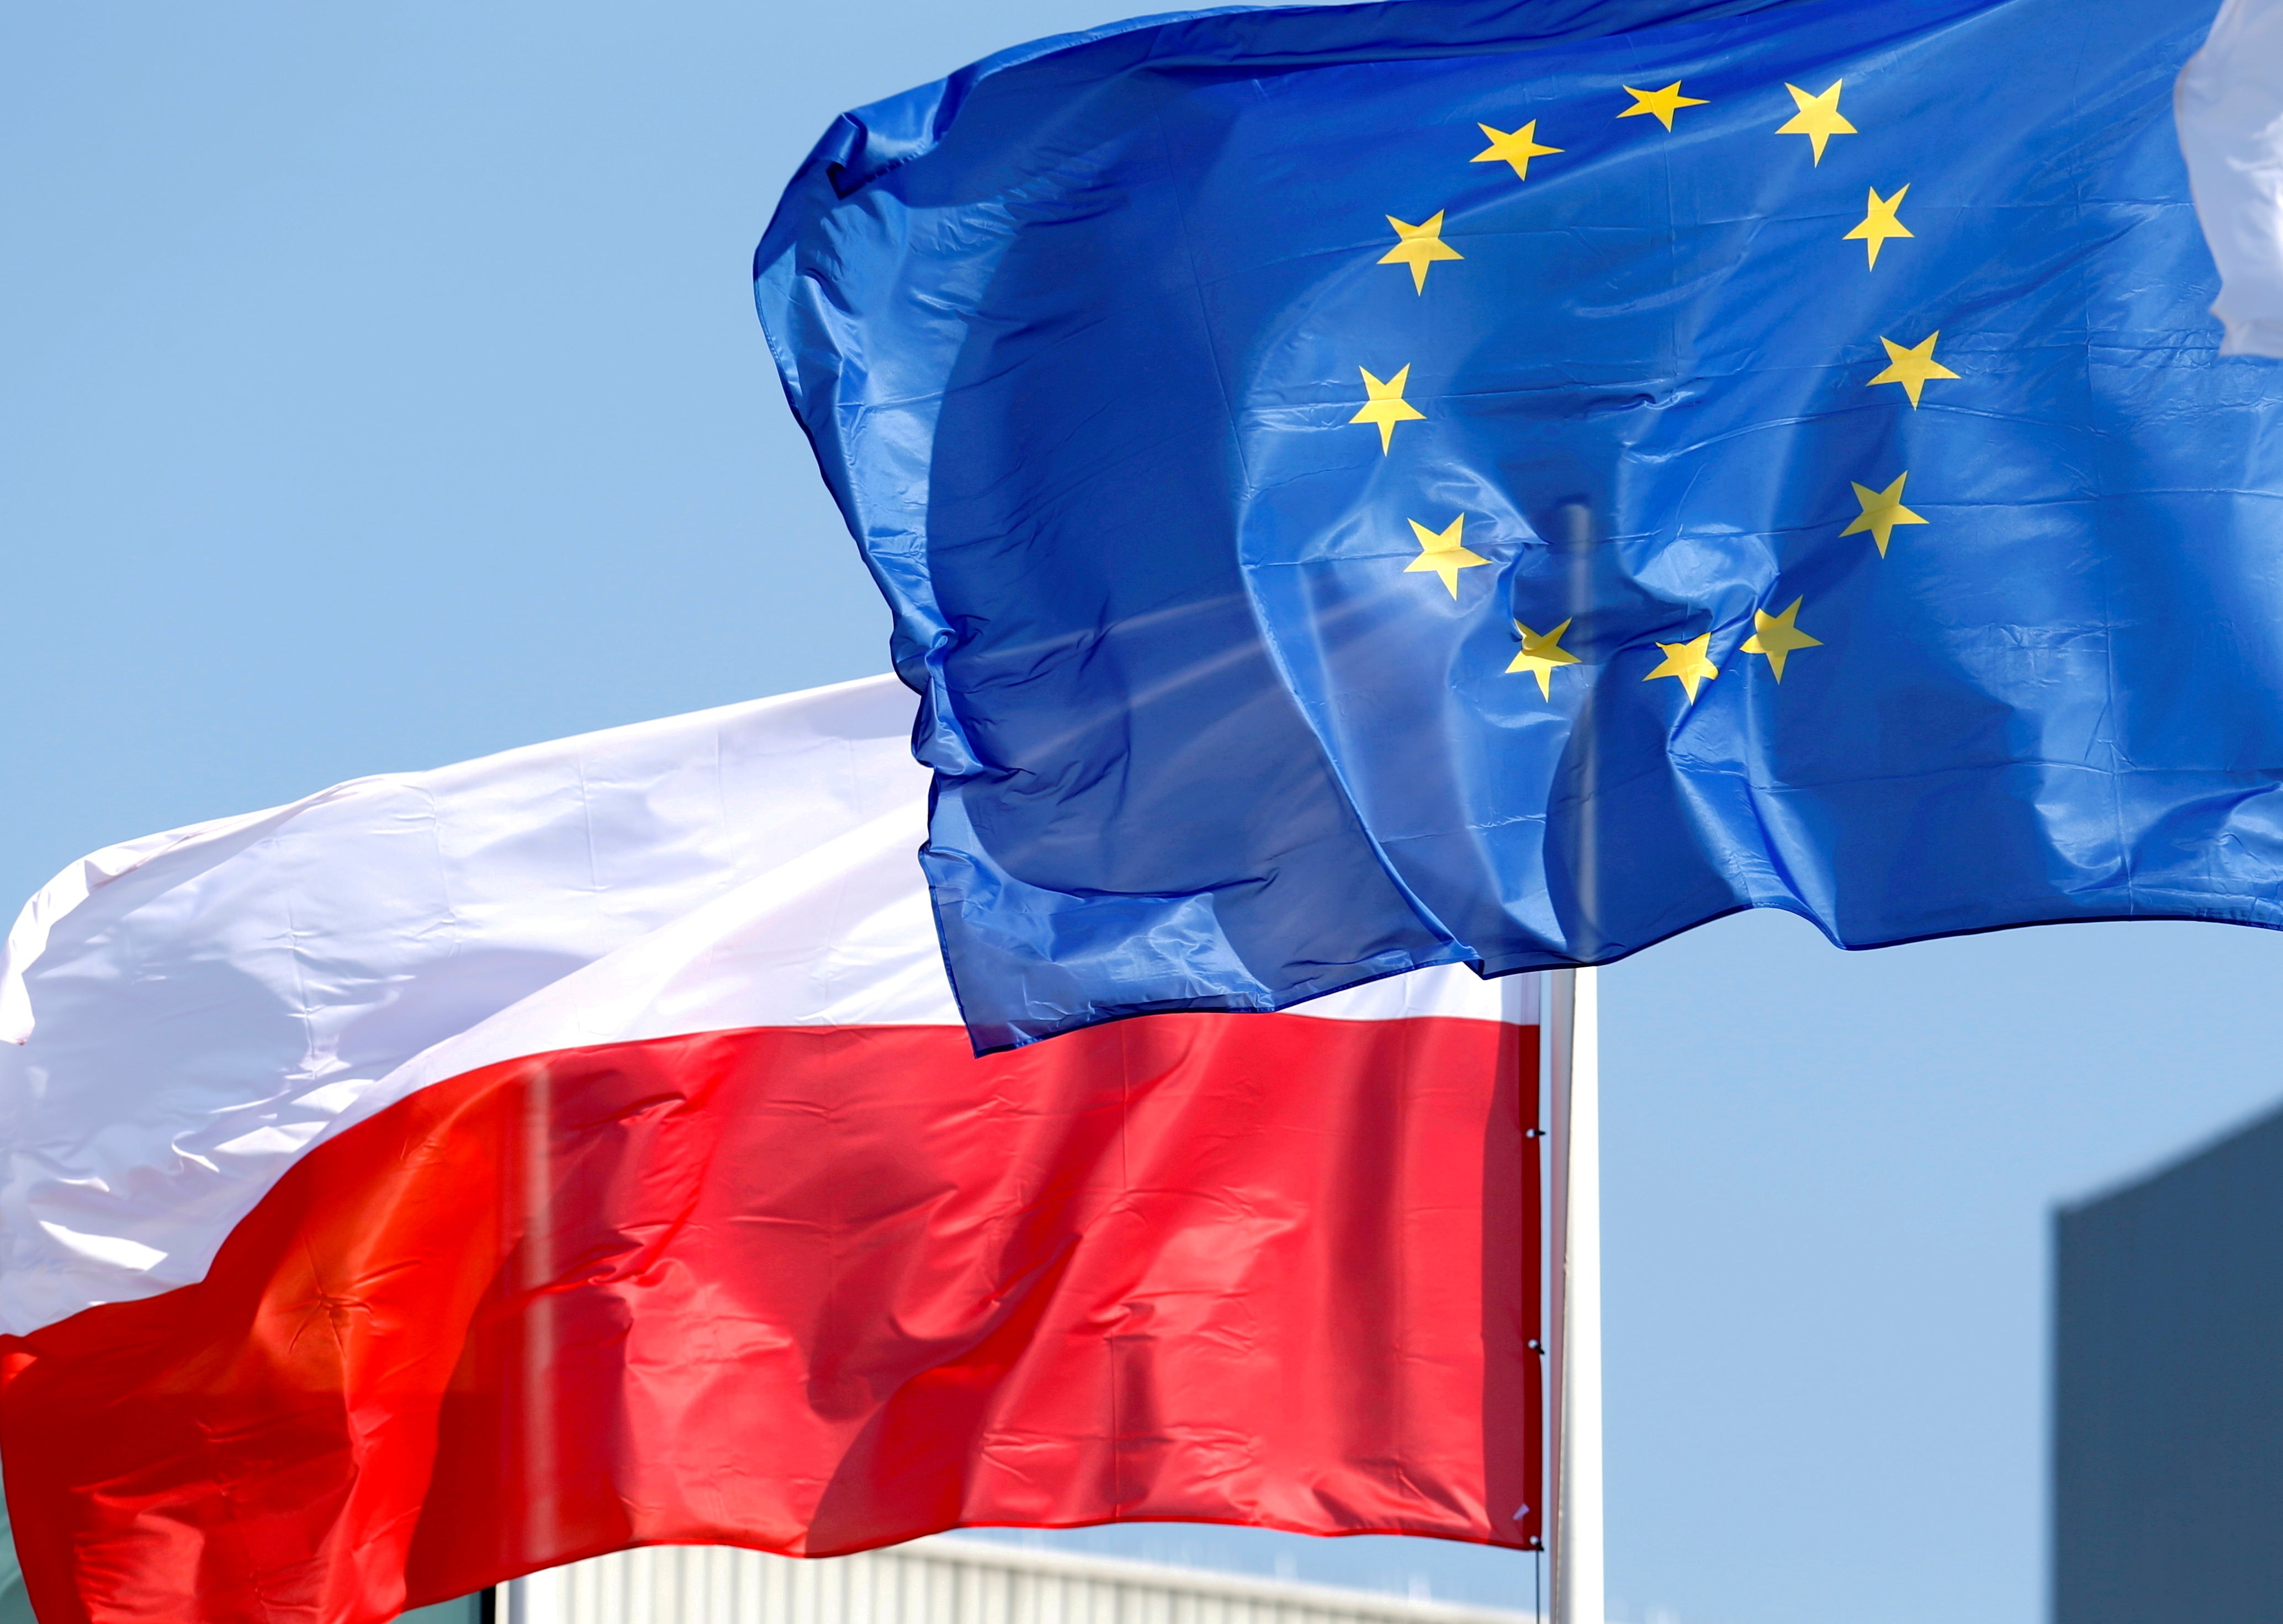 A stalemate has now been reached between the EU and Poland, where neither side recognises the supremacy of the other